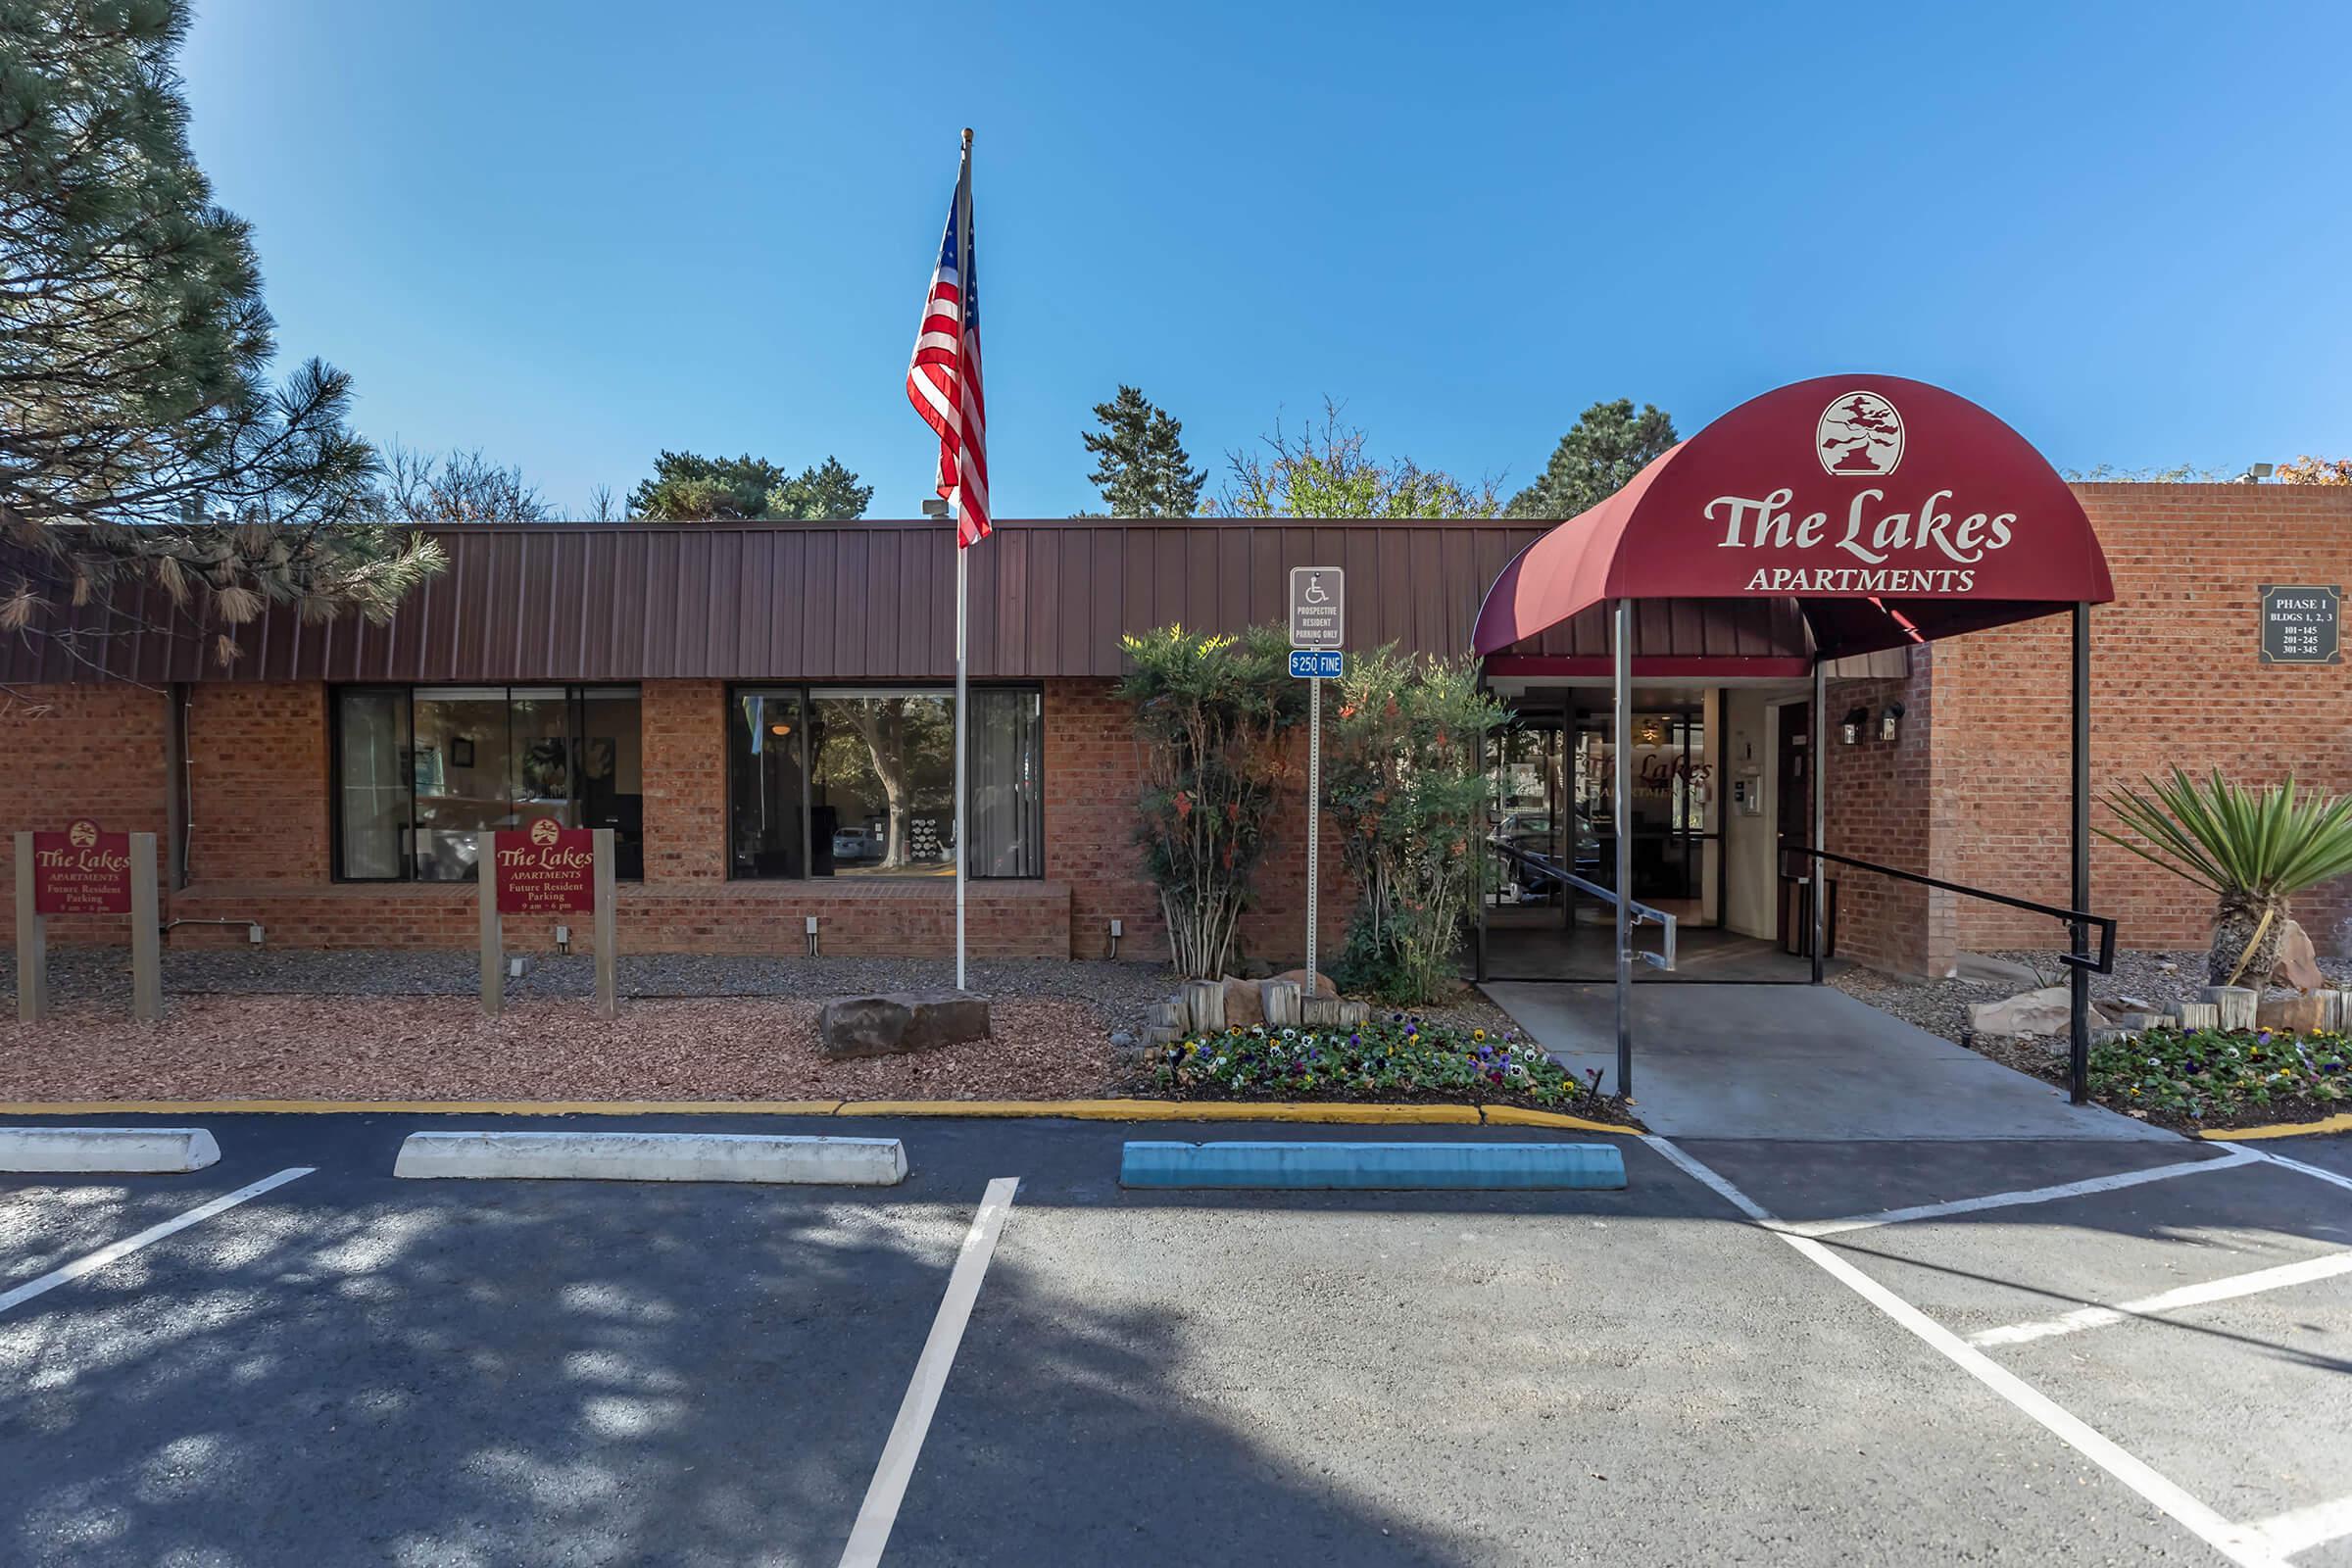 The Lakes leasing office with a red awning